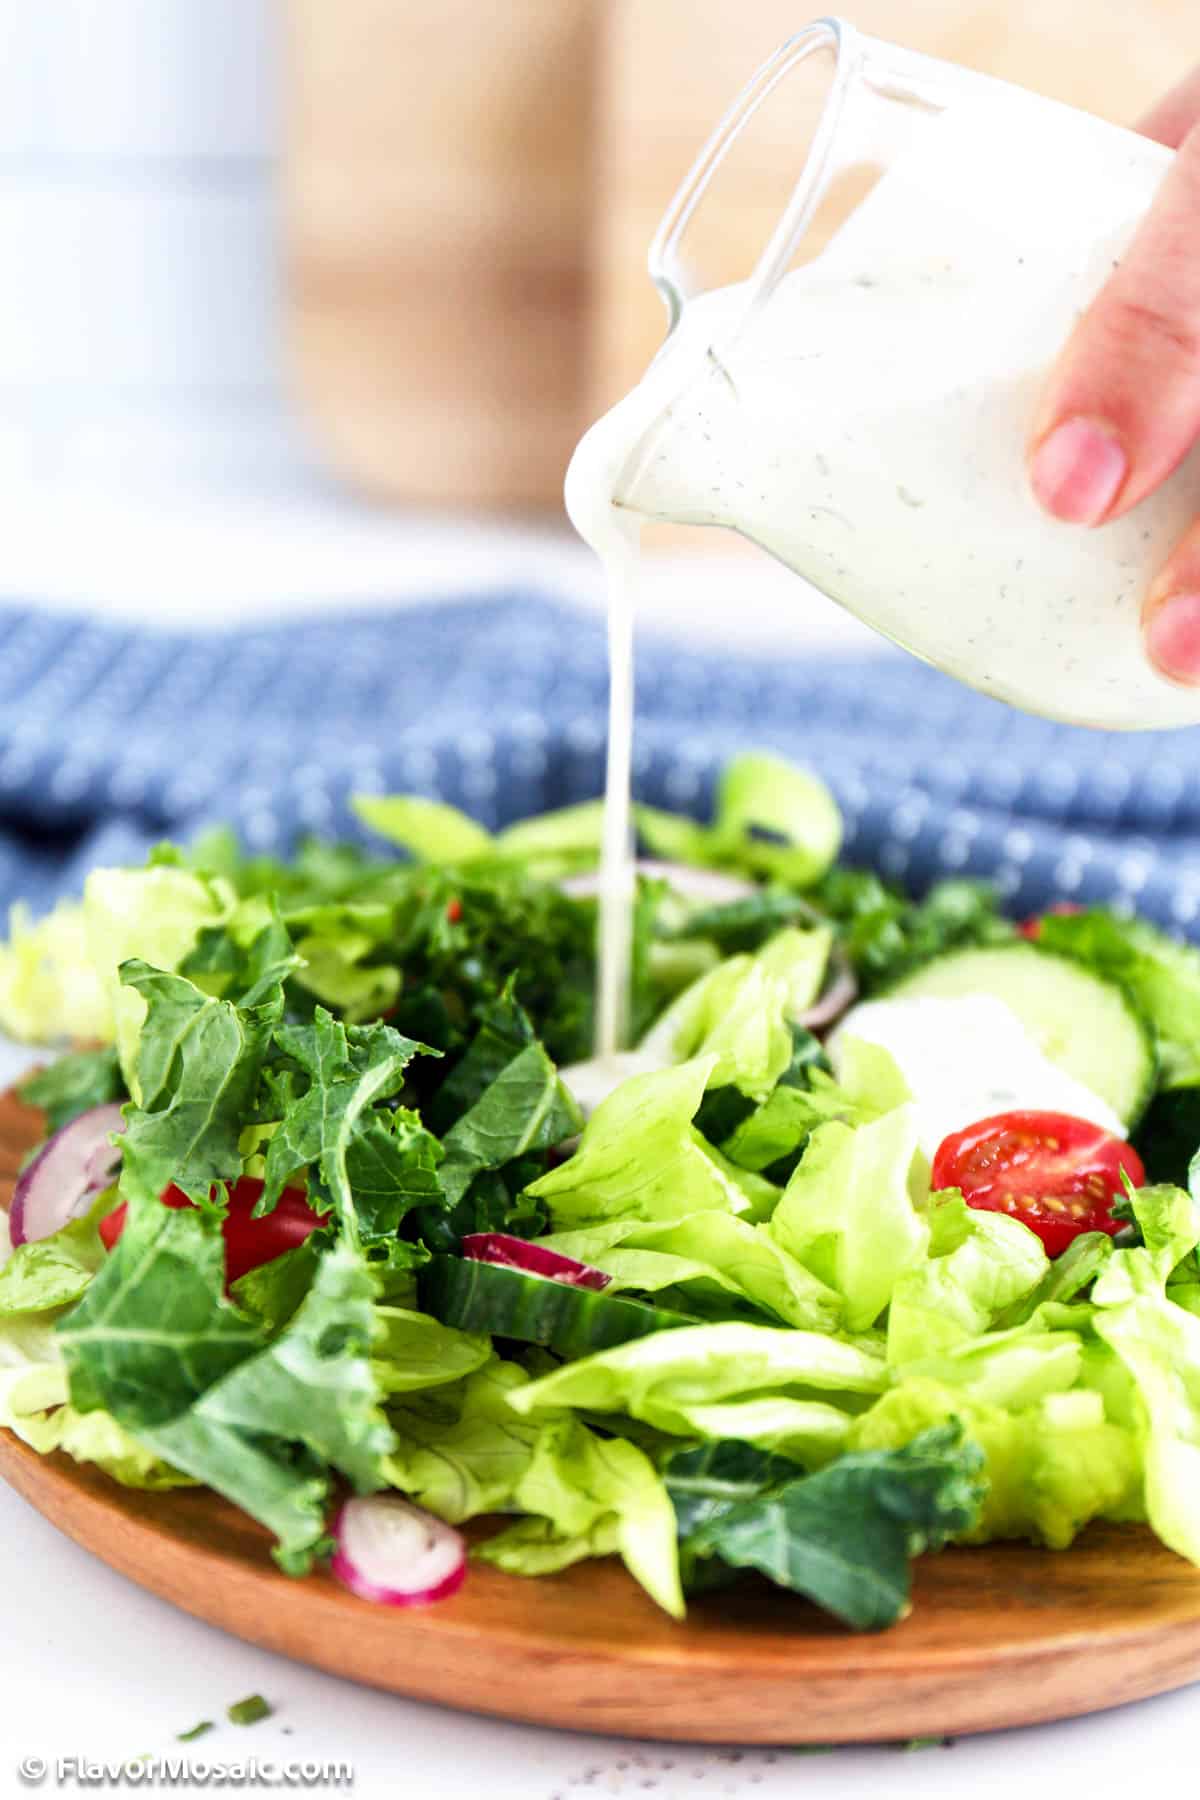 A small glass pitcher filled with ranch dressing being poured over a green leaf salad with cucumbers, tomatoes, radishes, and onions.